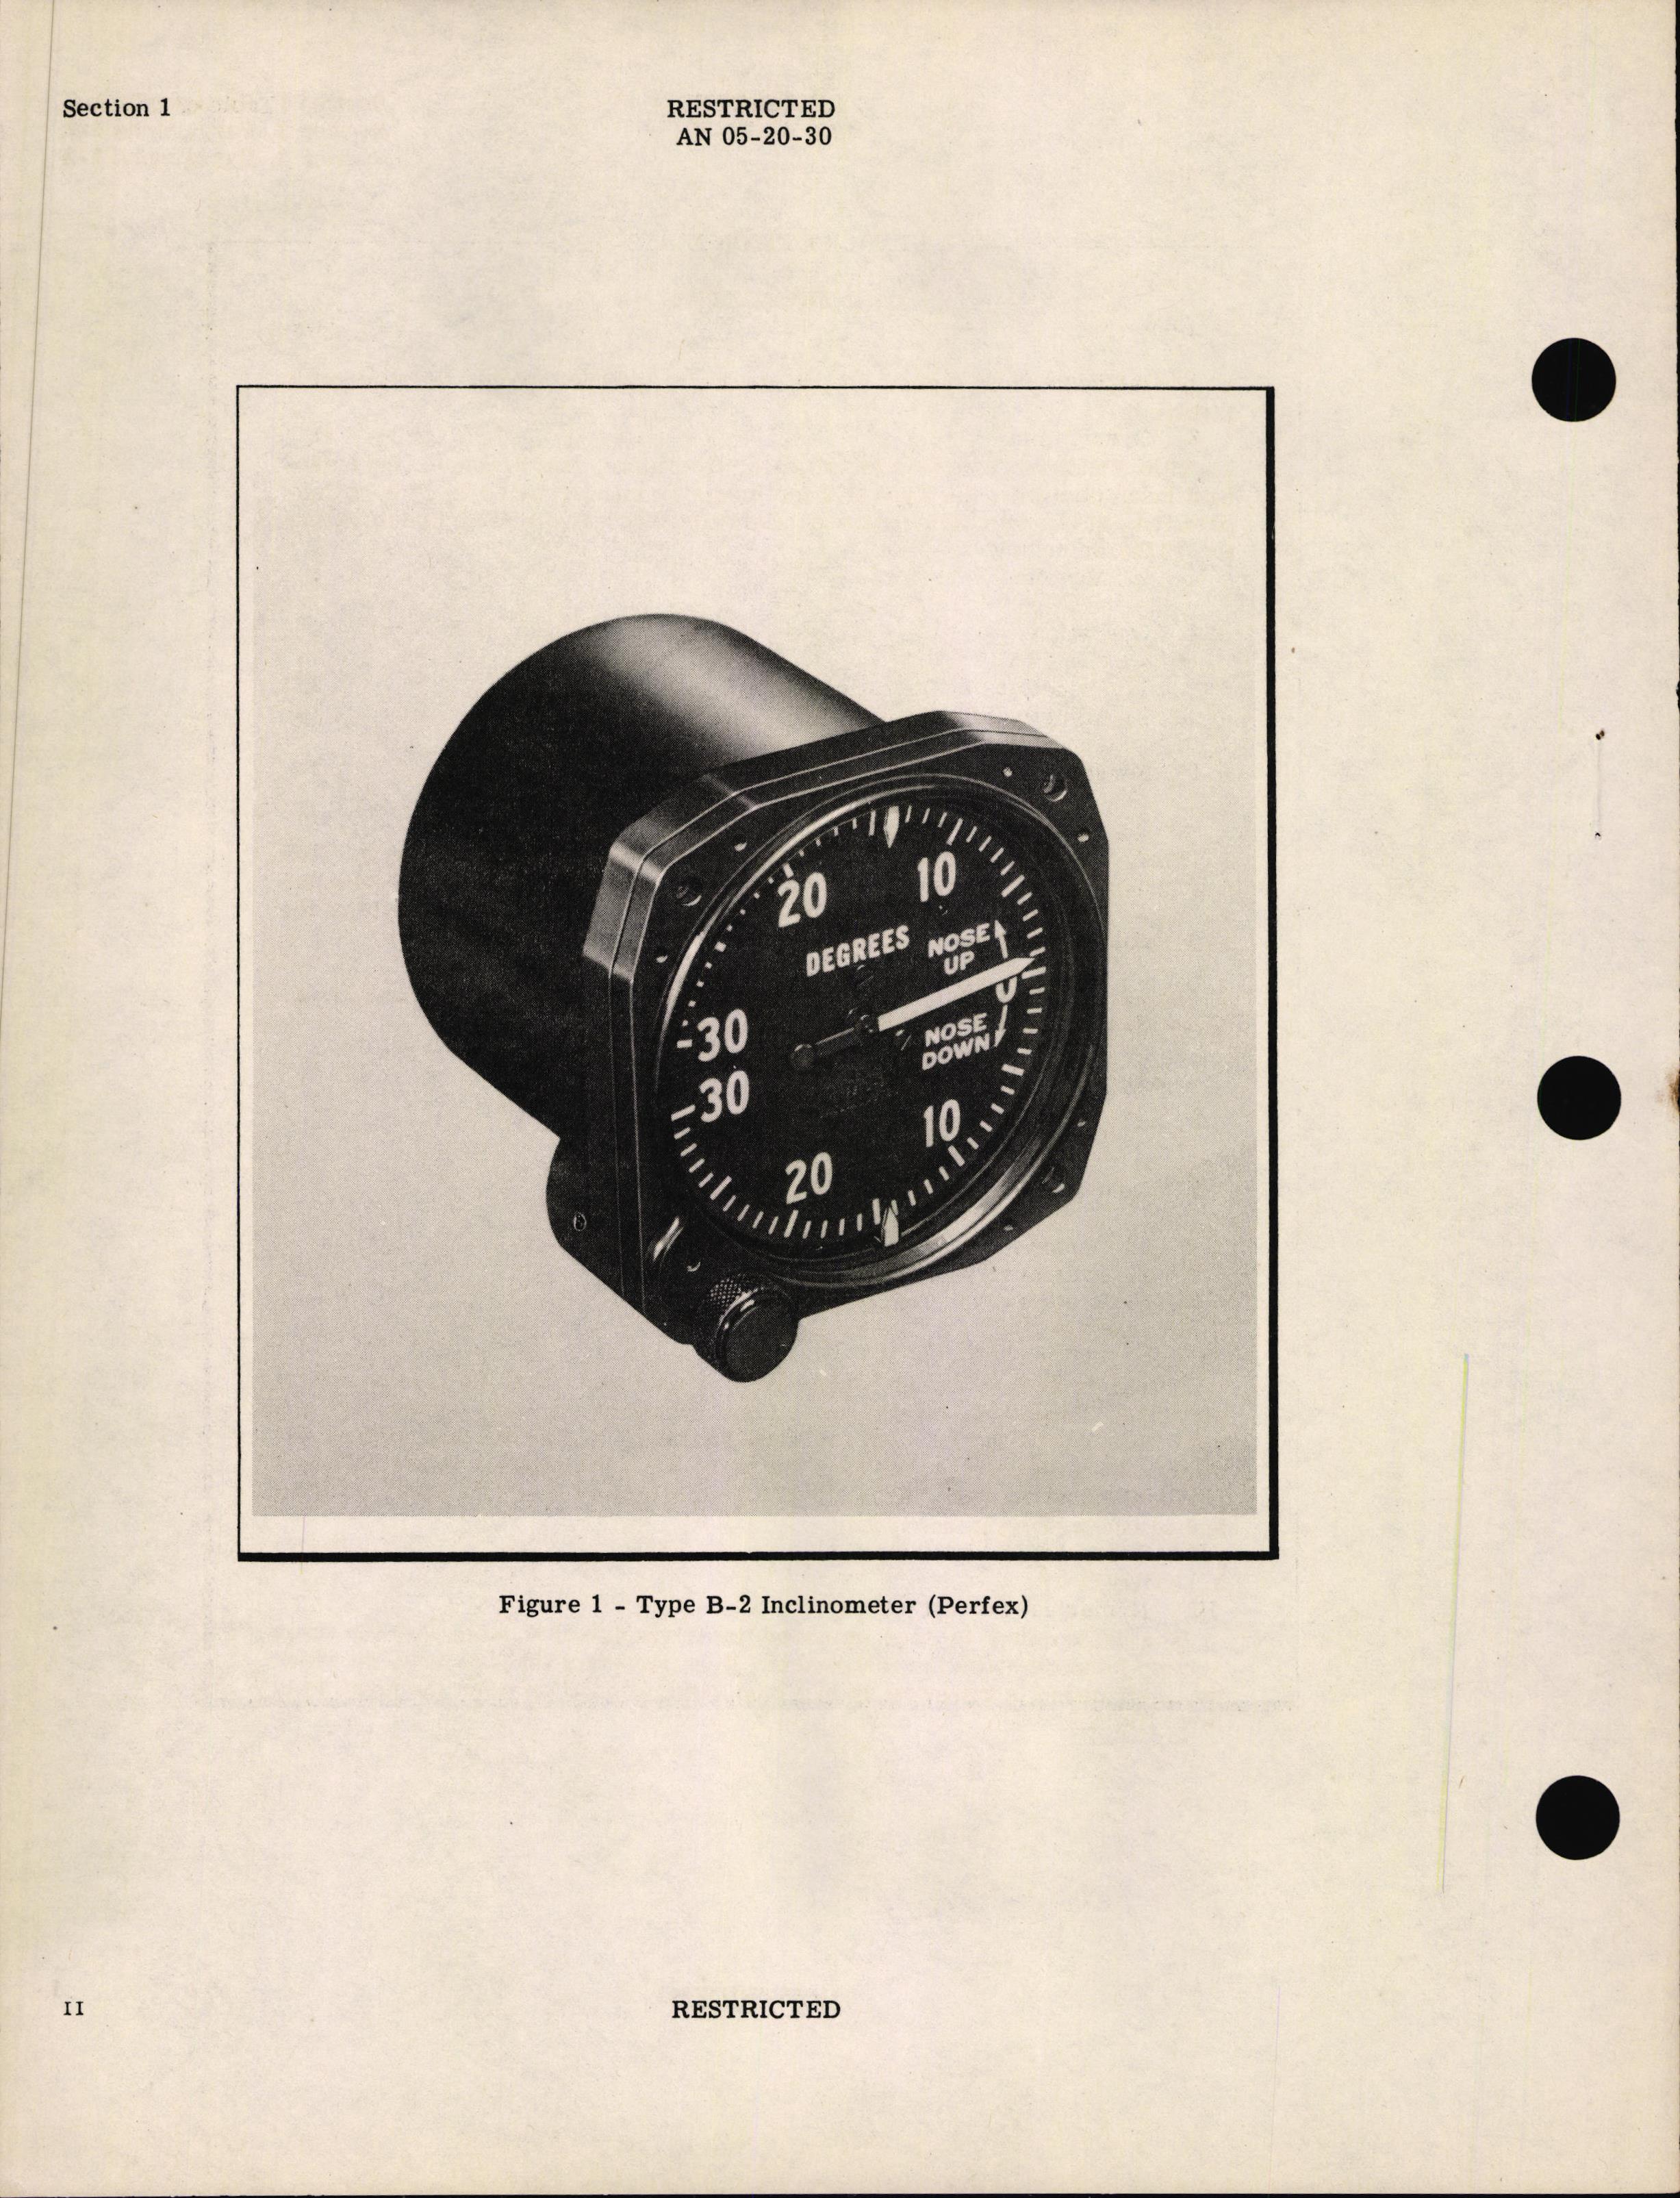 Sample page 6 from AirCorps Library document: Handbook of Instructions with Parts Catalog for Type B-2 Inclinometer